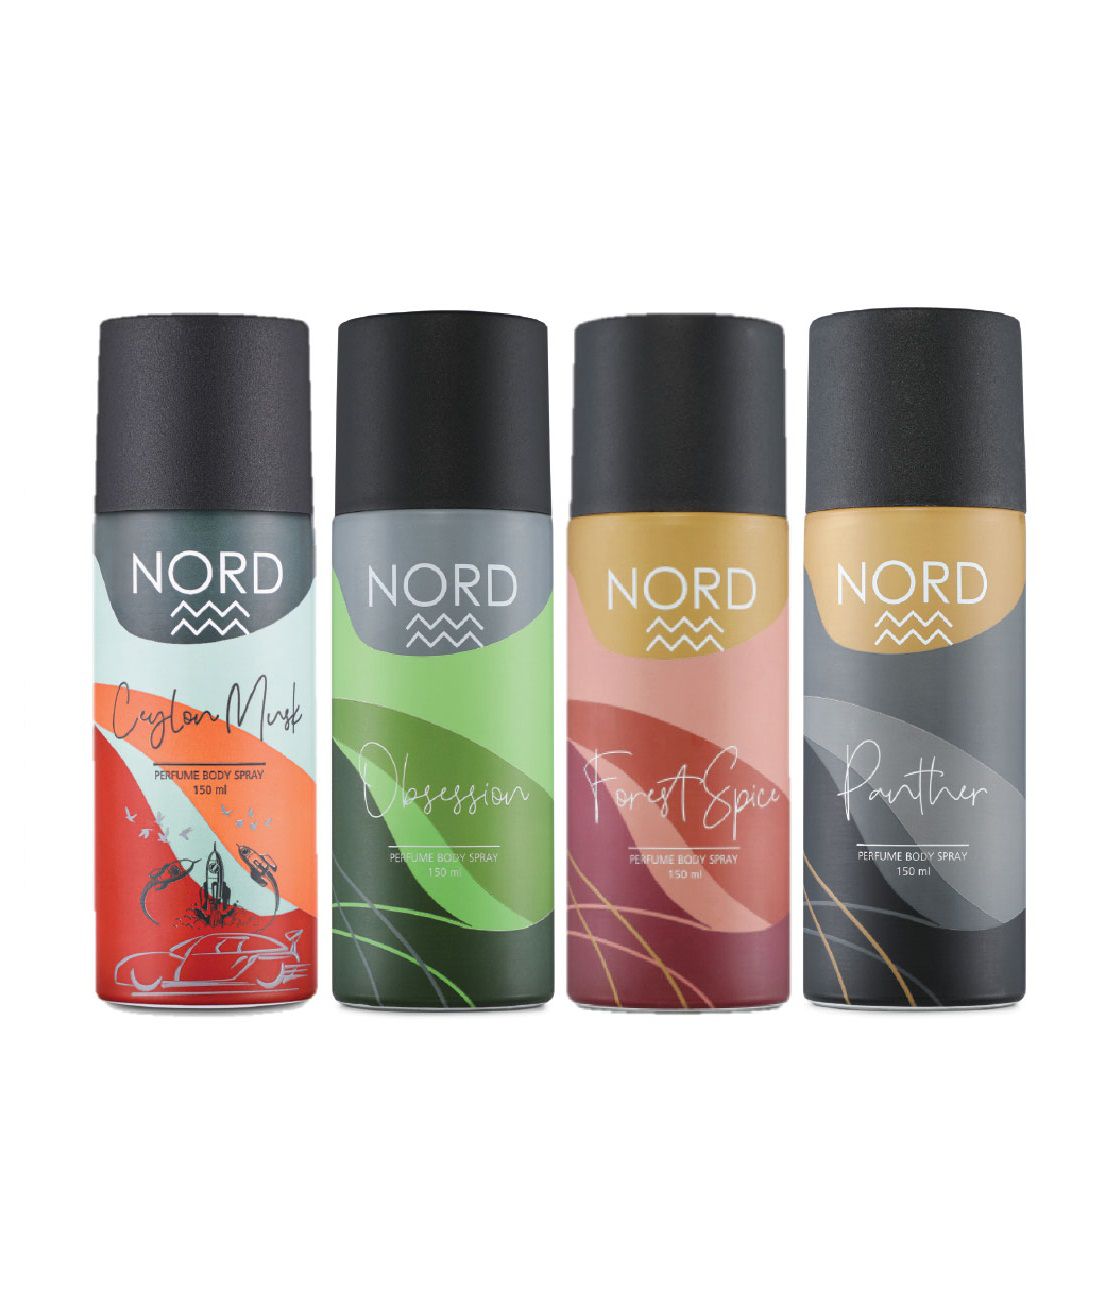     			NORD Deodorant Body Spray - Obsession, Forest Spice, Panther and Ceylon Musk 150 ml each (Pack of 4)